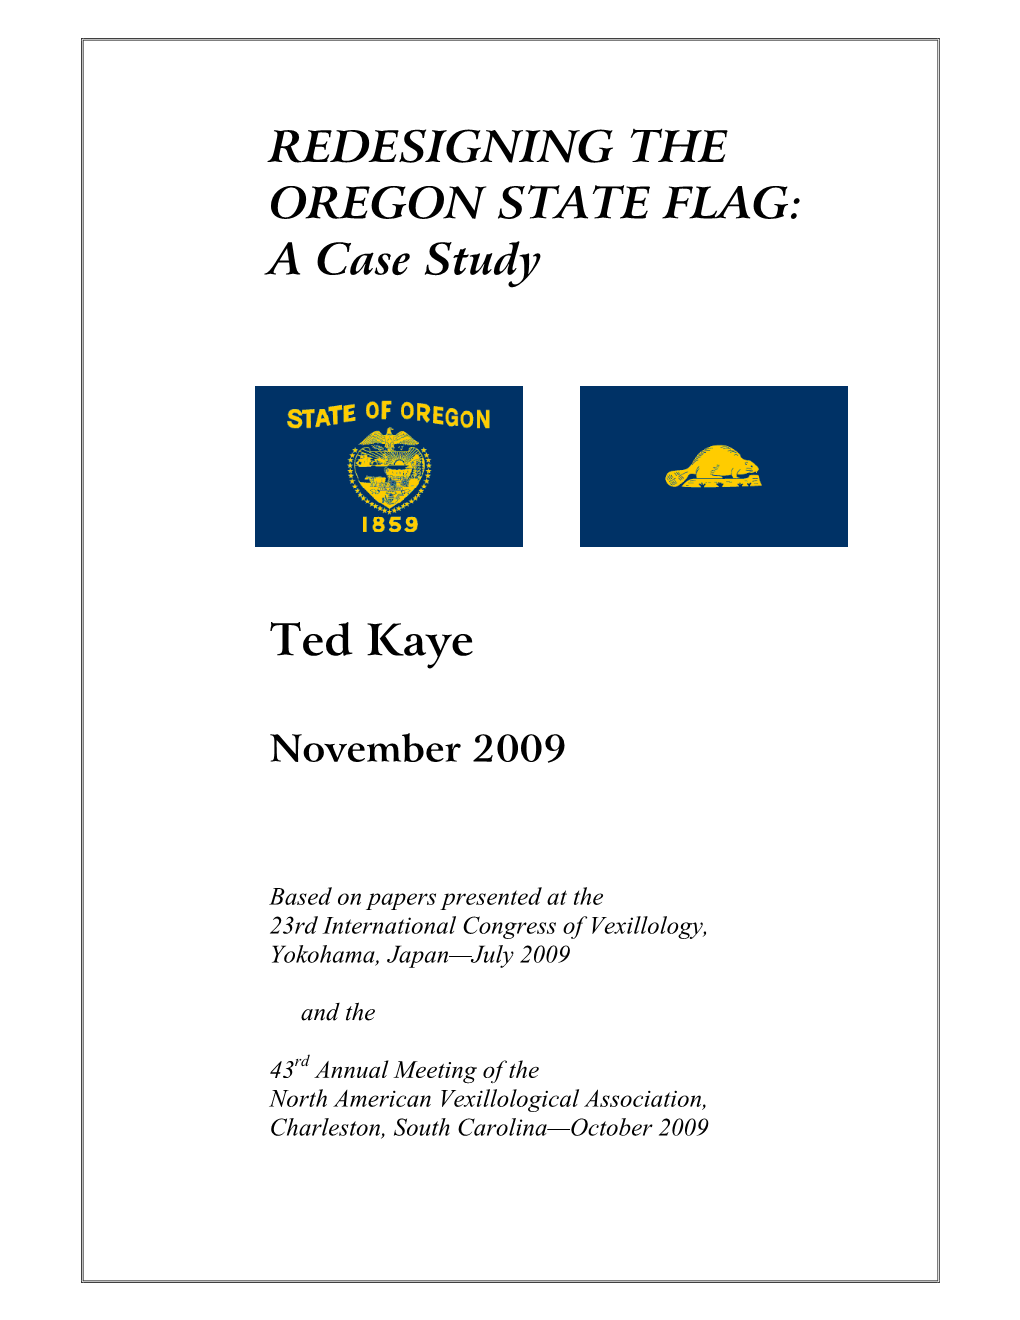 REDESIGNING the OREGON STATE FLAG: a Case Study